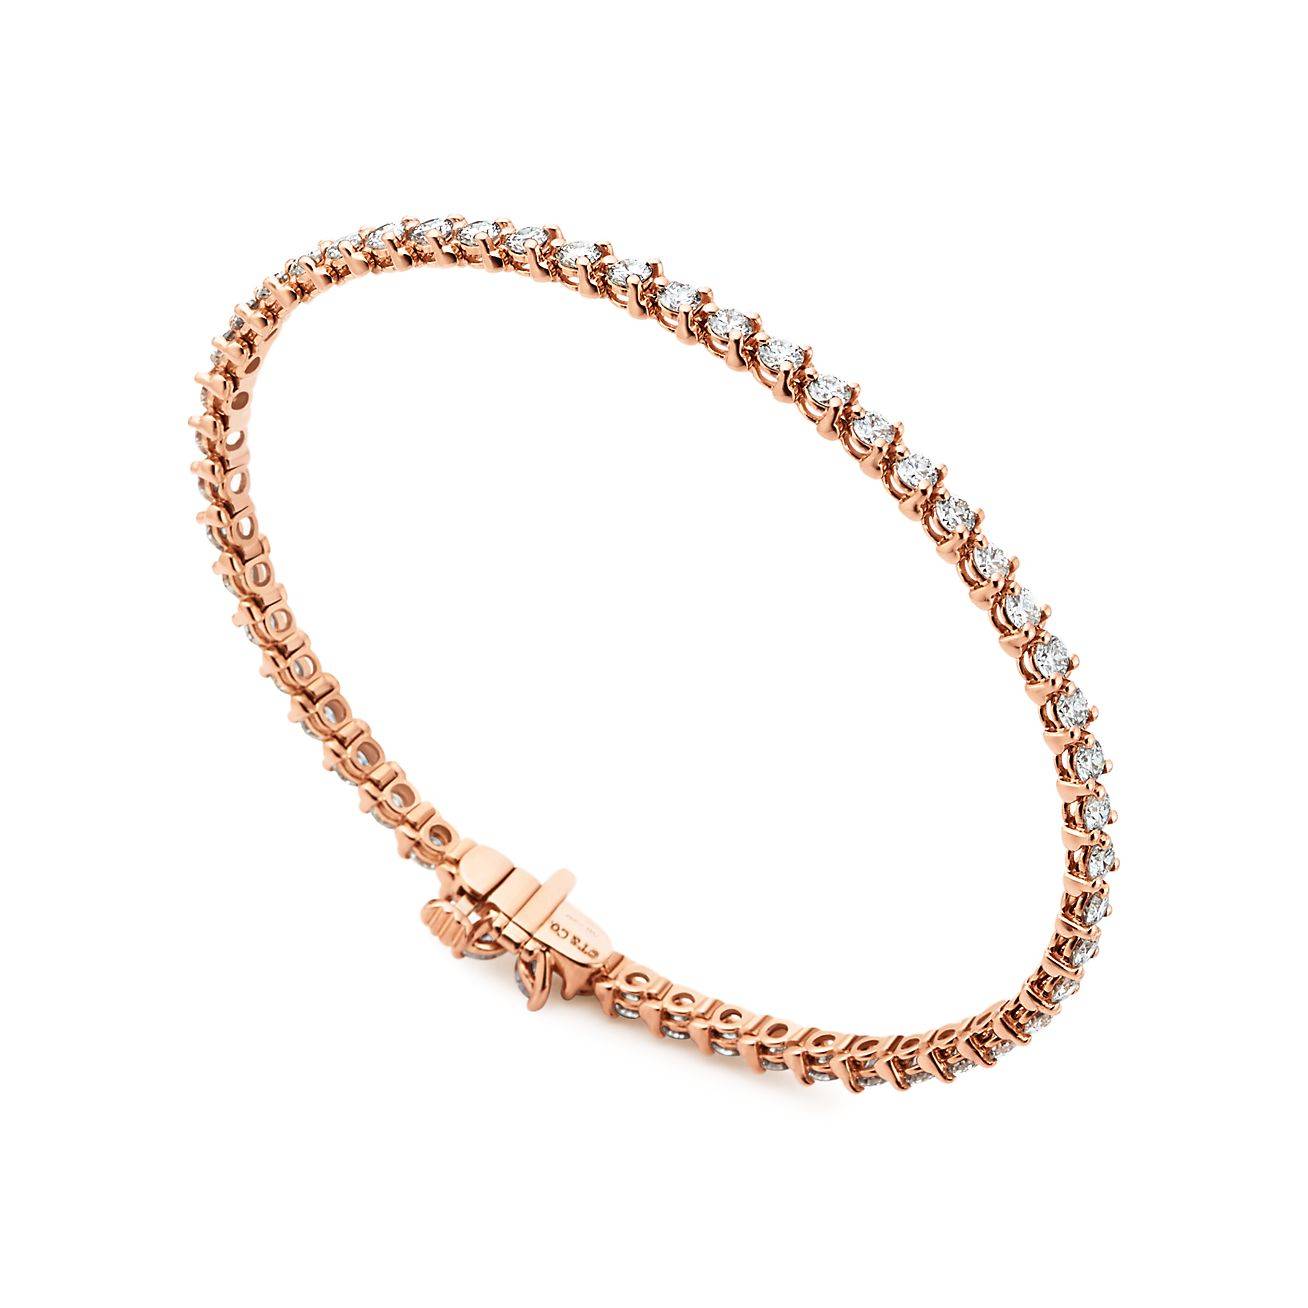 TIFFANY VICTORIA® TENNIS BRACELET IN ROSE GOLD WITH DIAMONDS